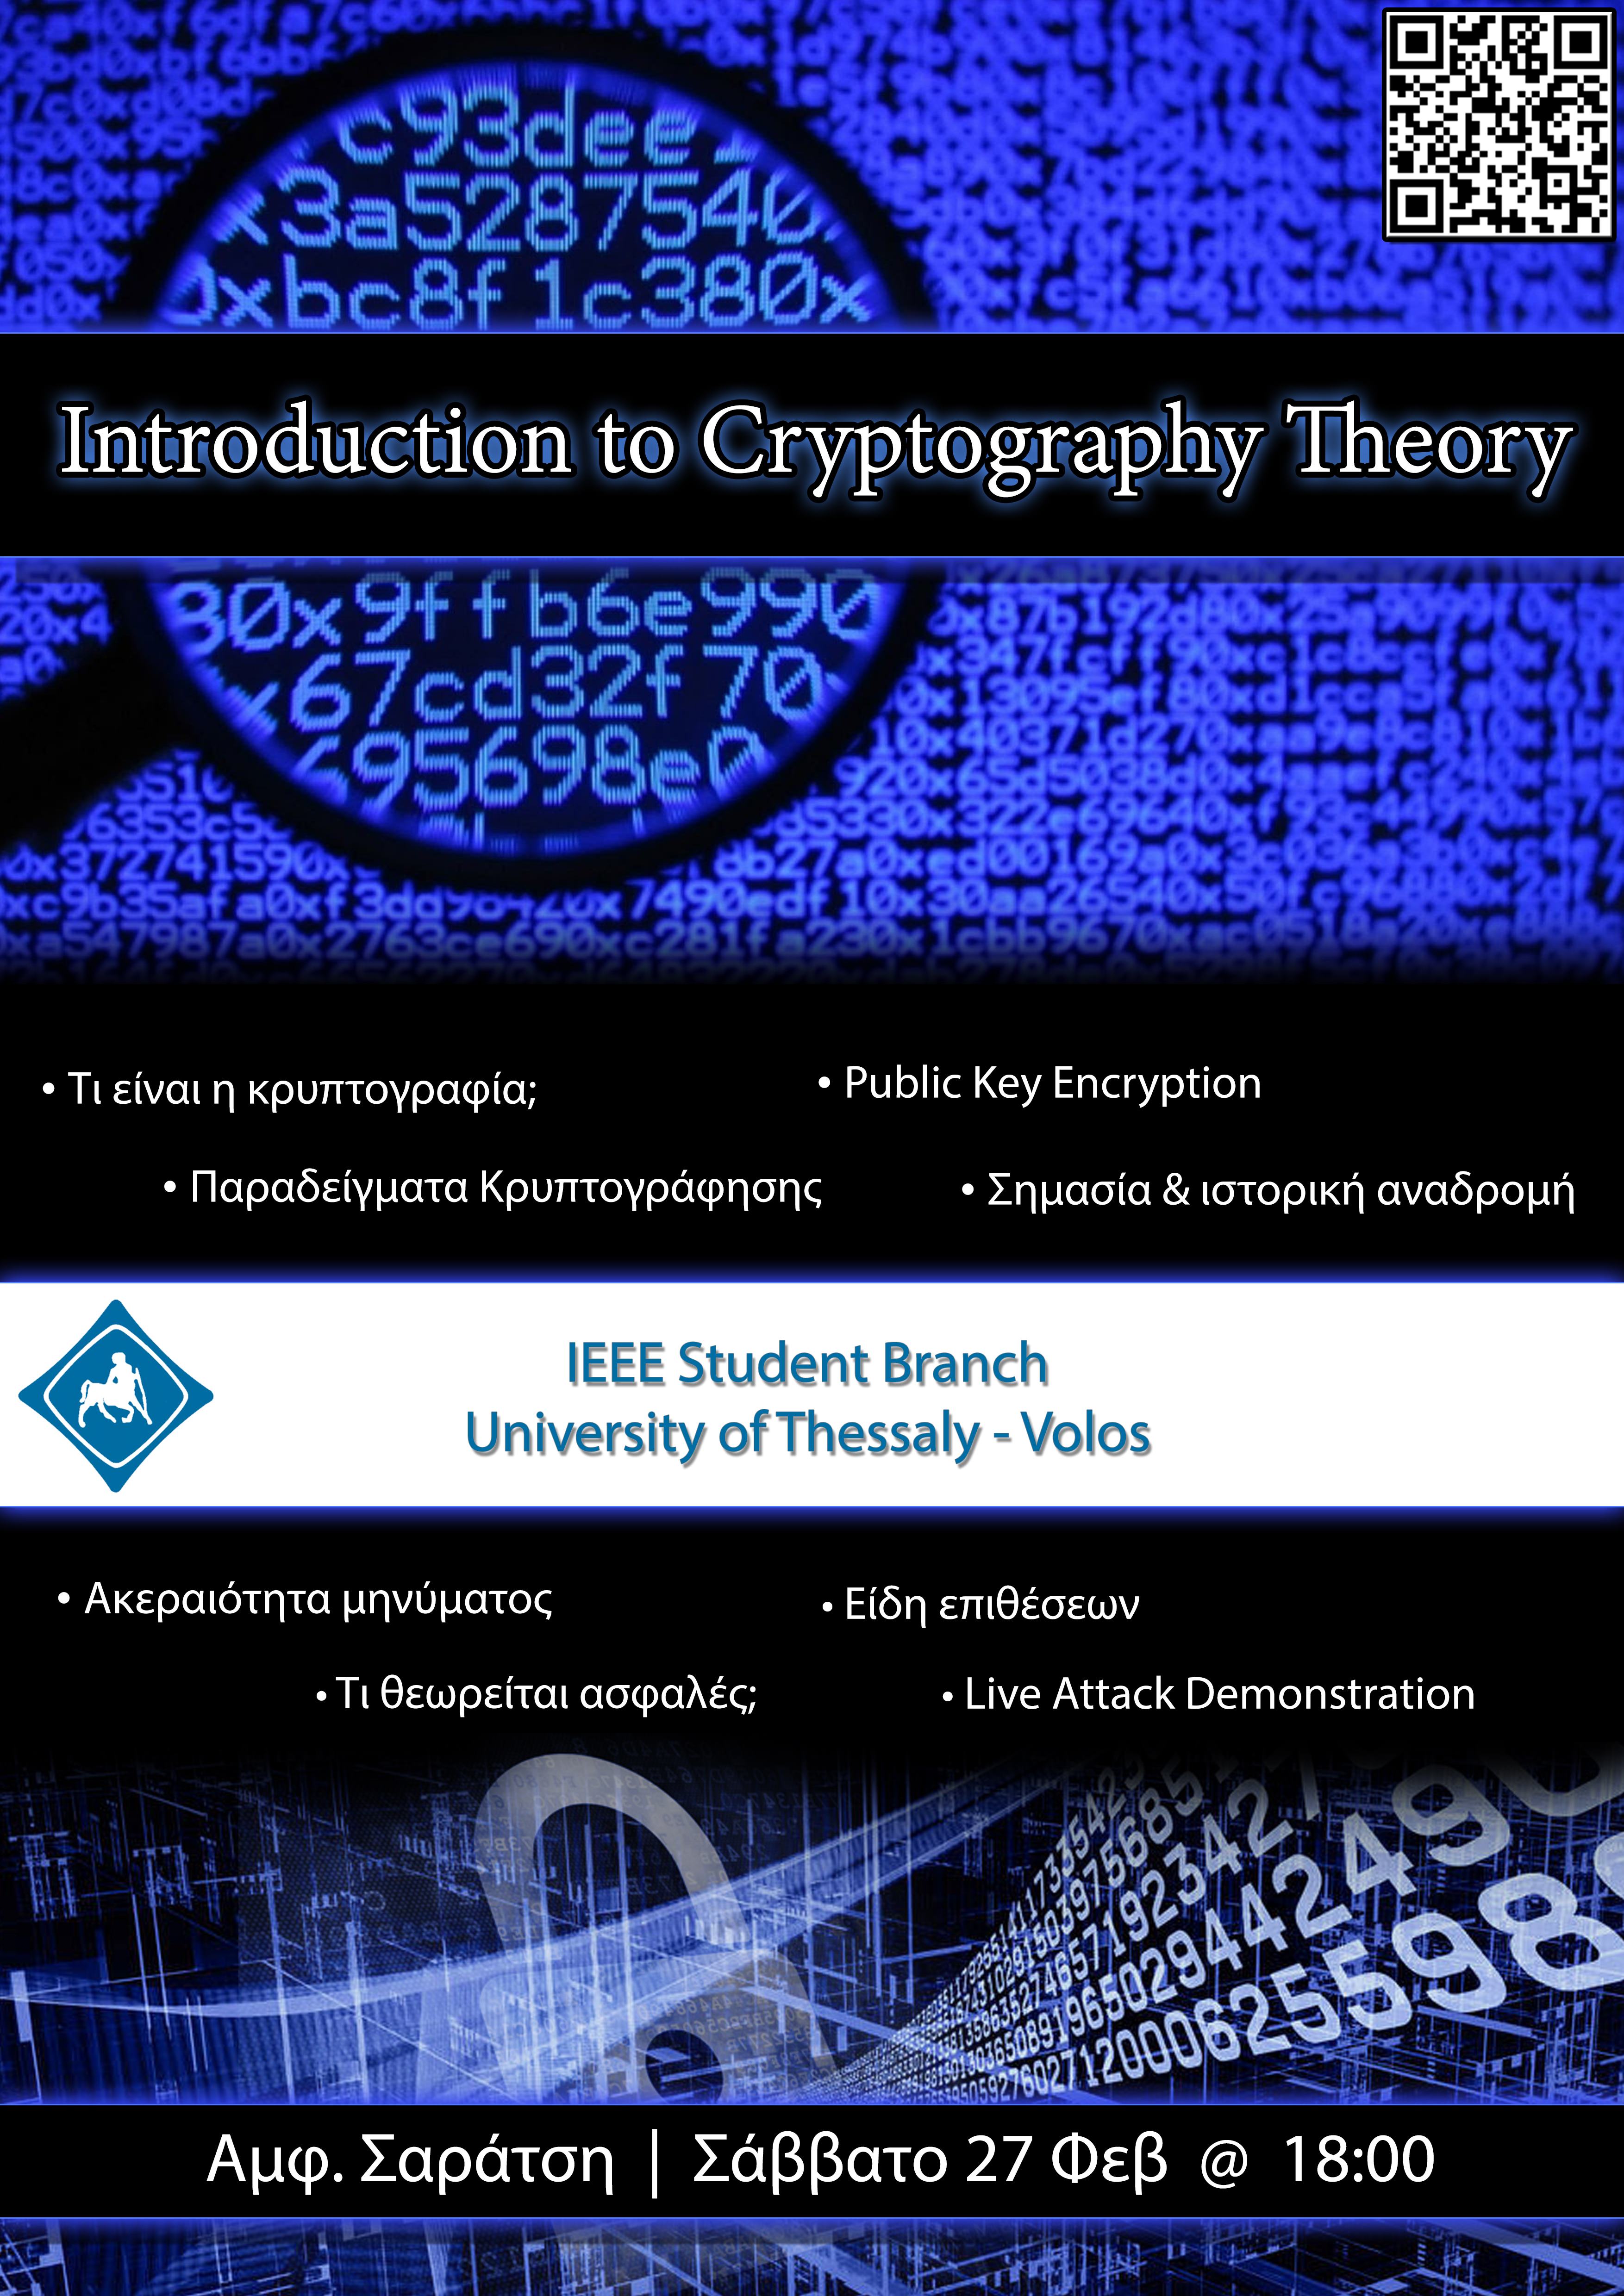 Introduction to Cryptography Theory